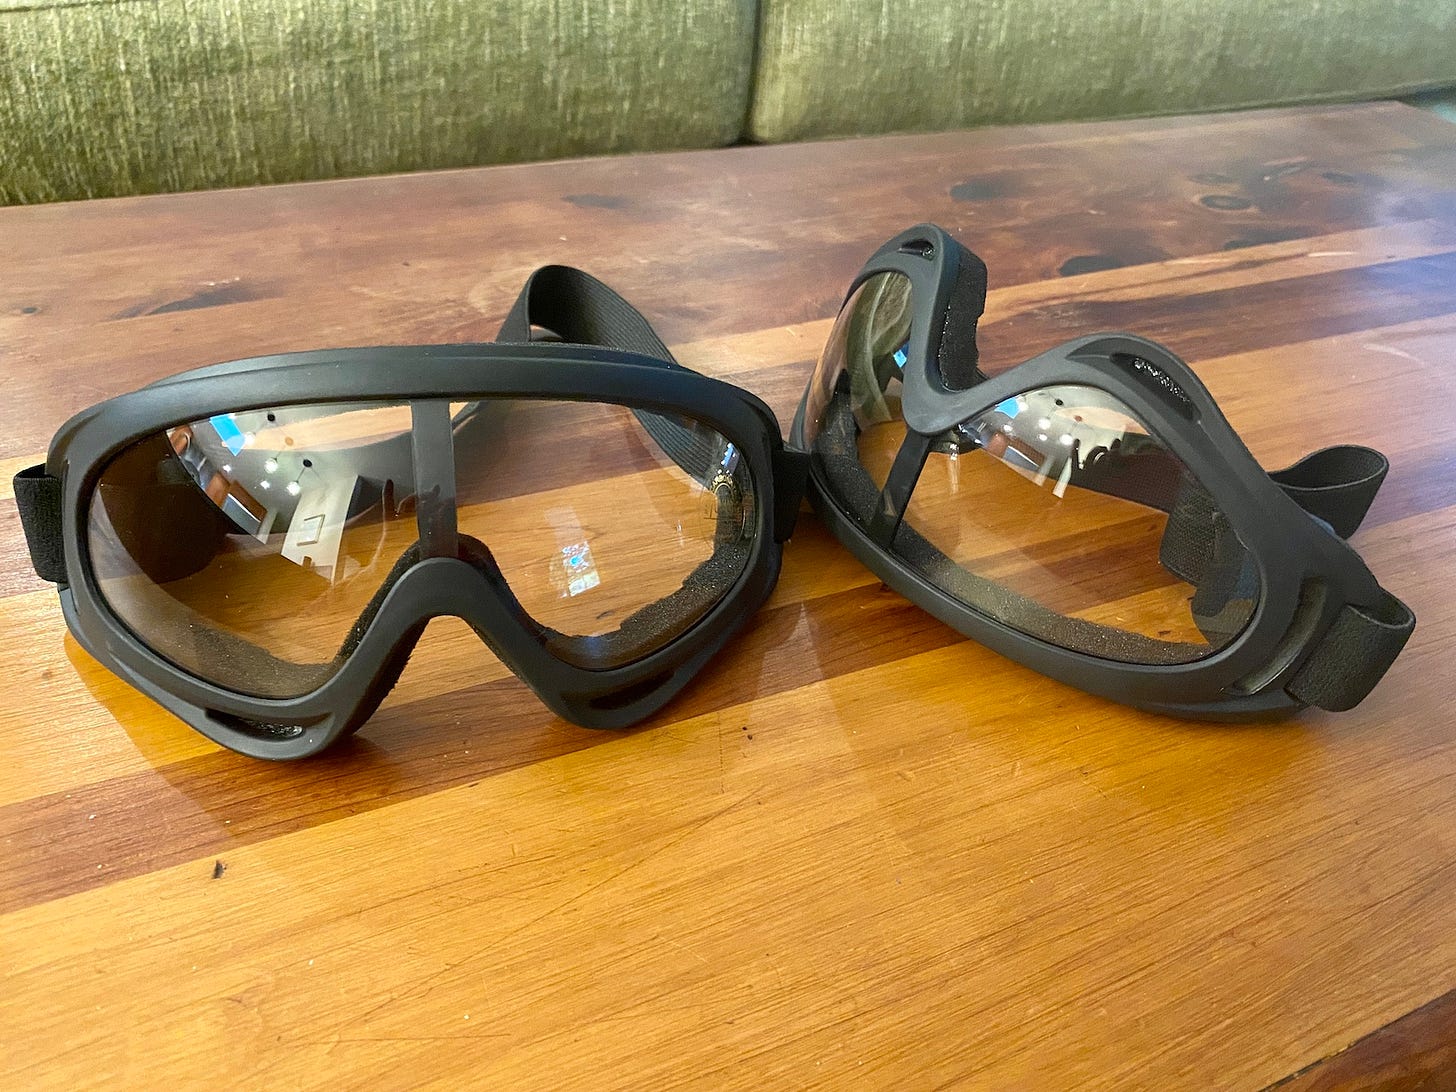 A pair of ski goggles with black frames and clear lenses sits on a wooden tabletop.